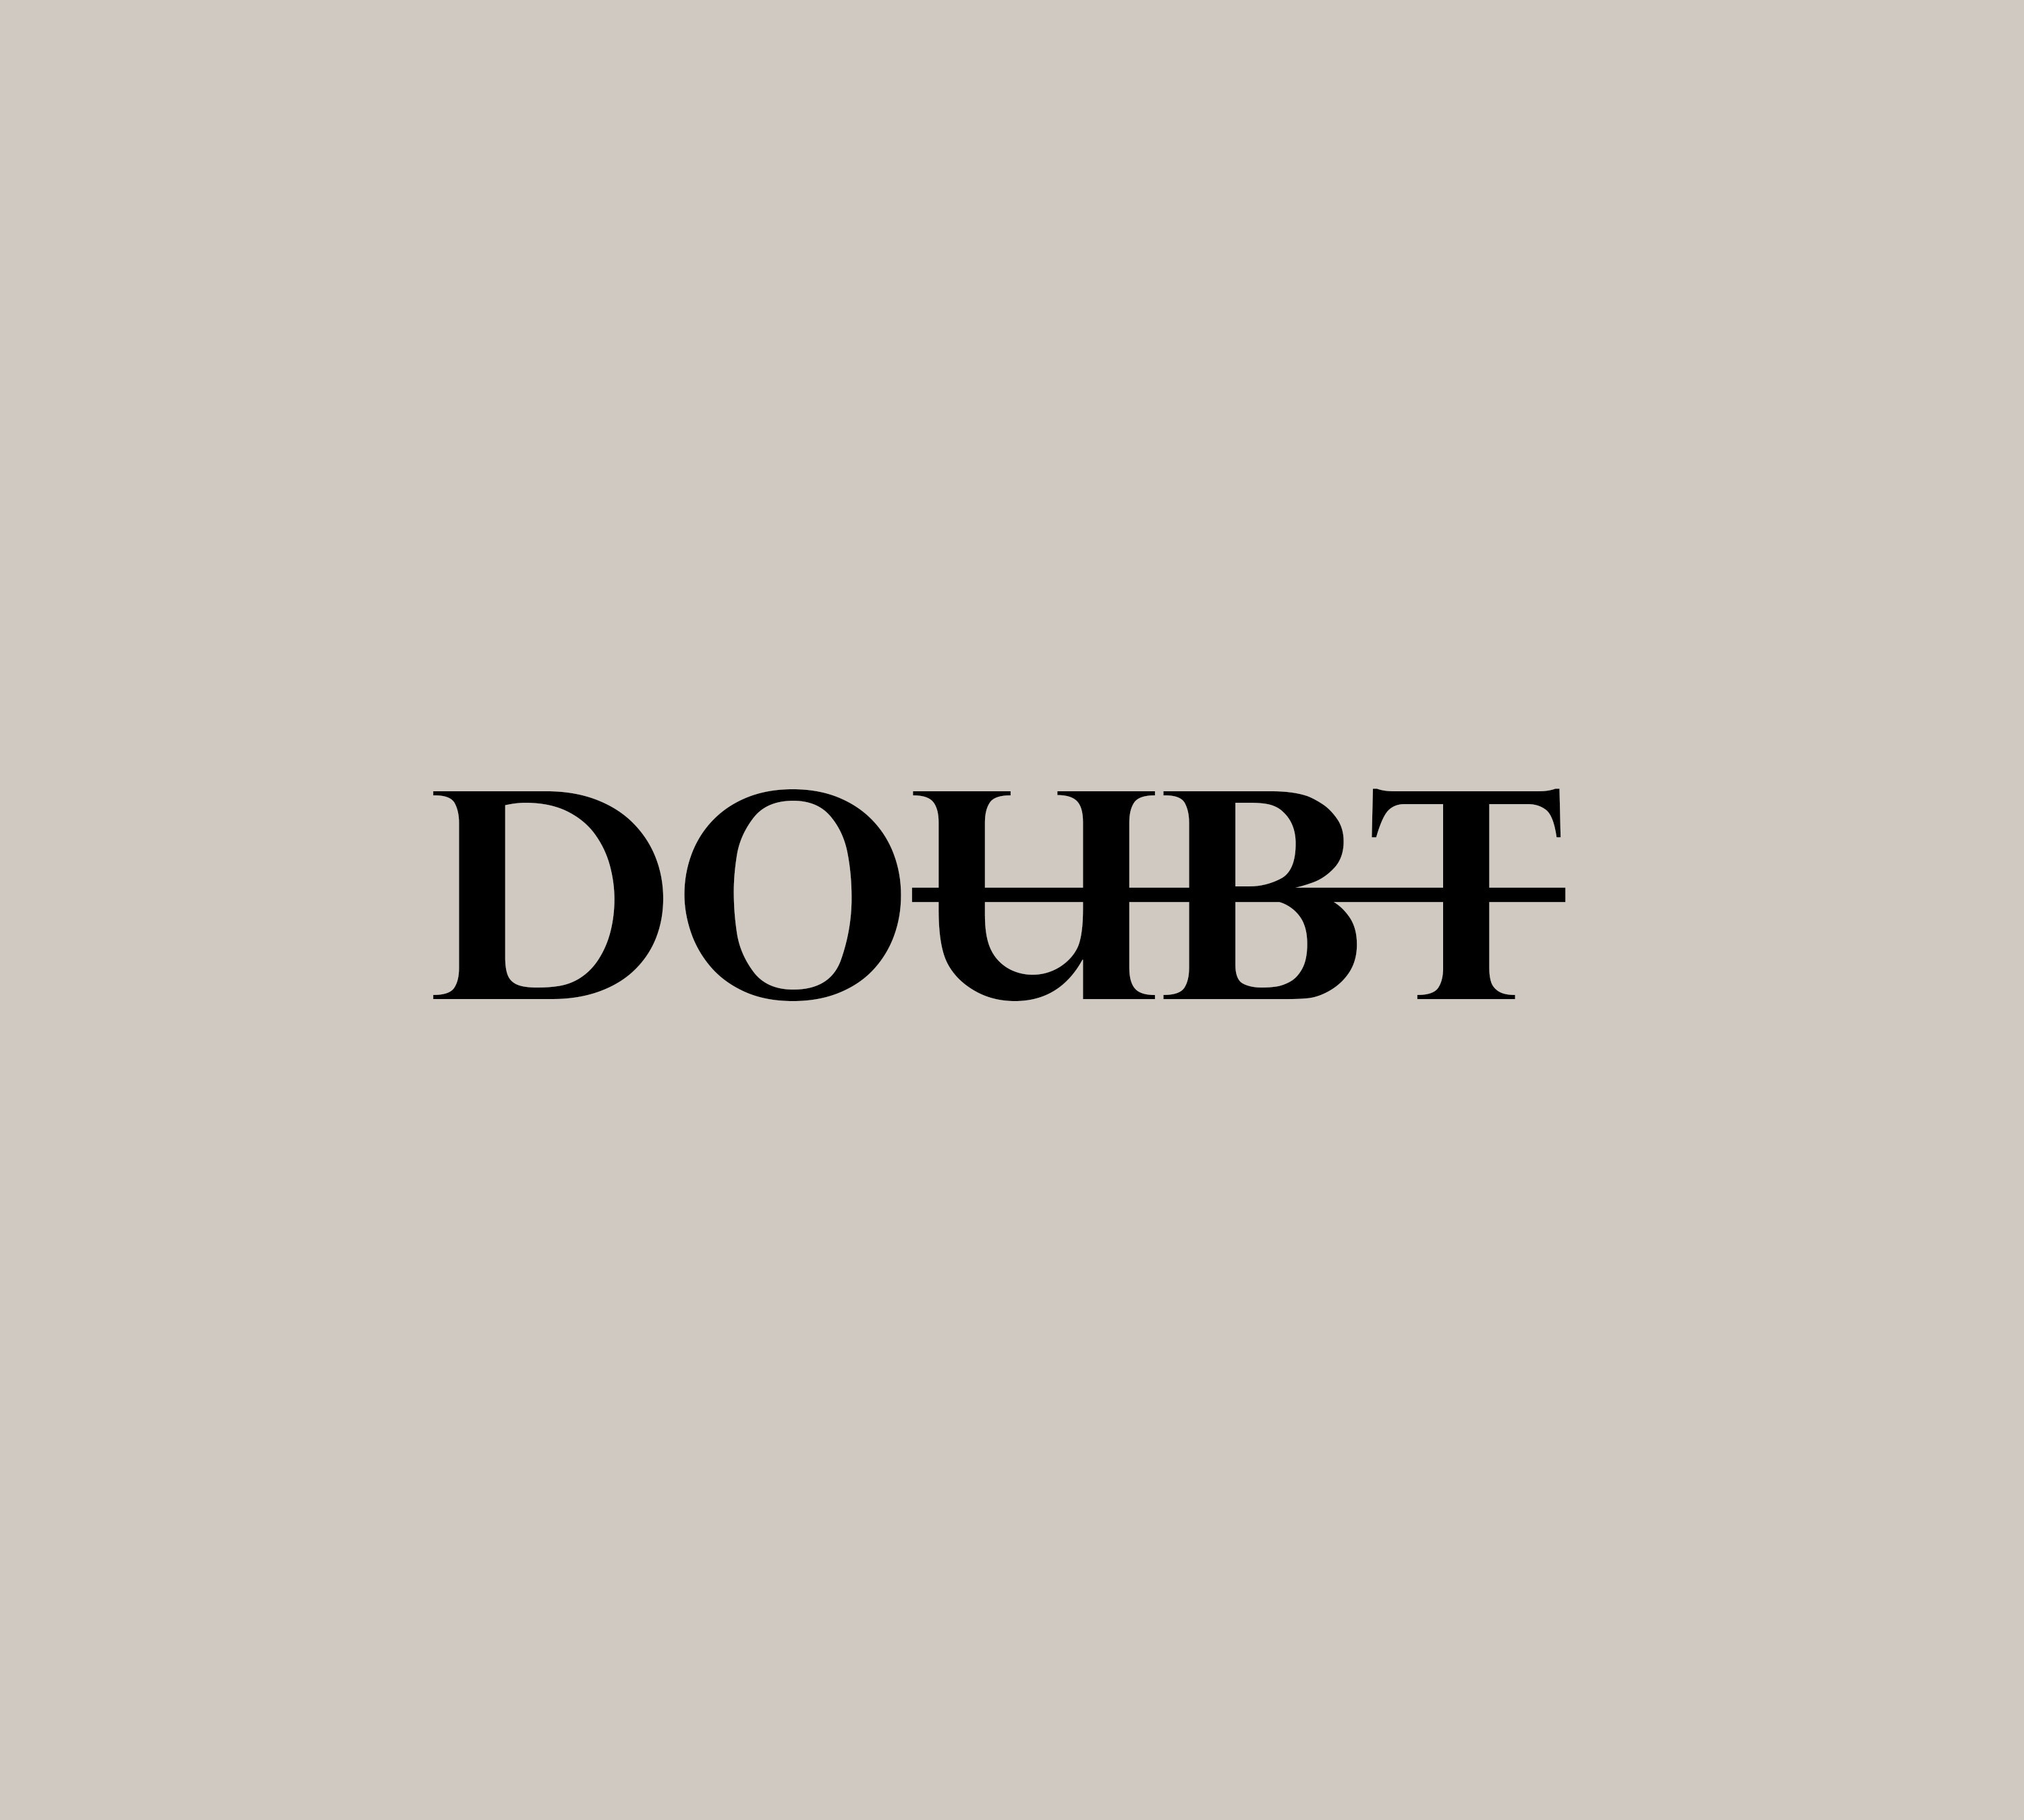 doubt pic